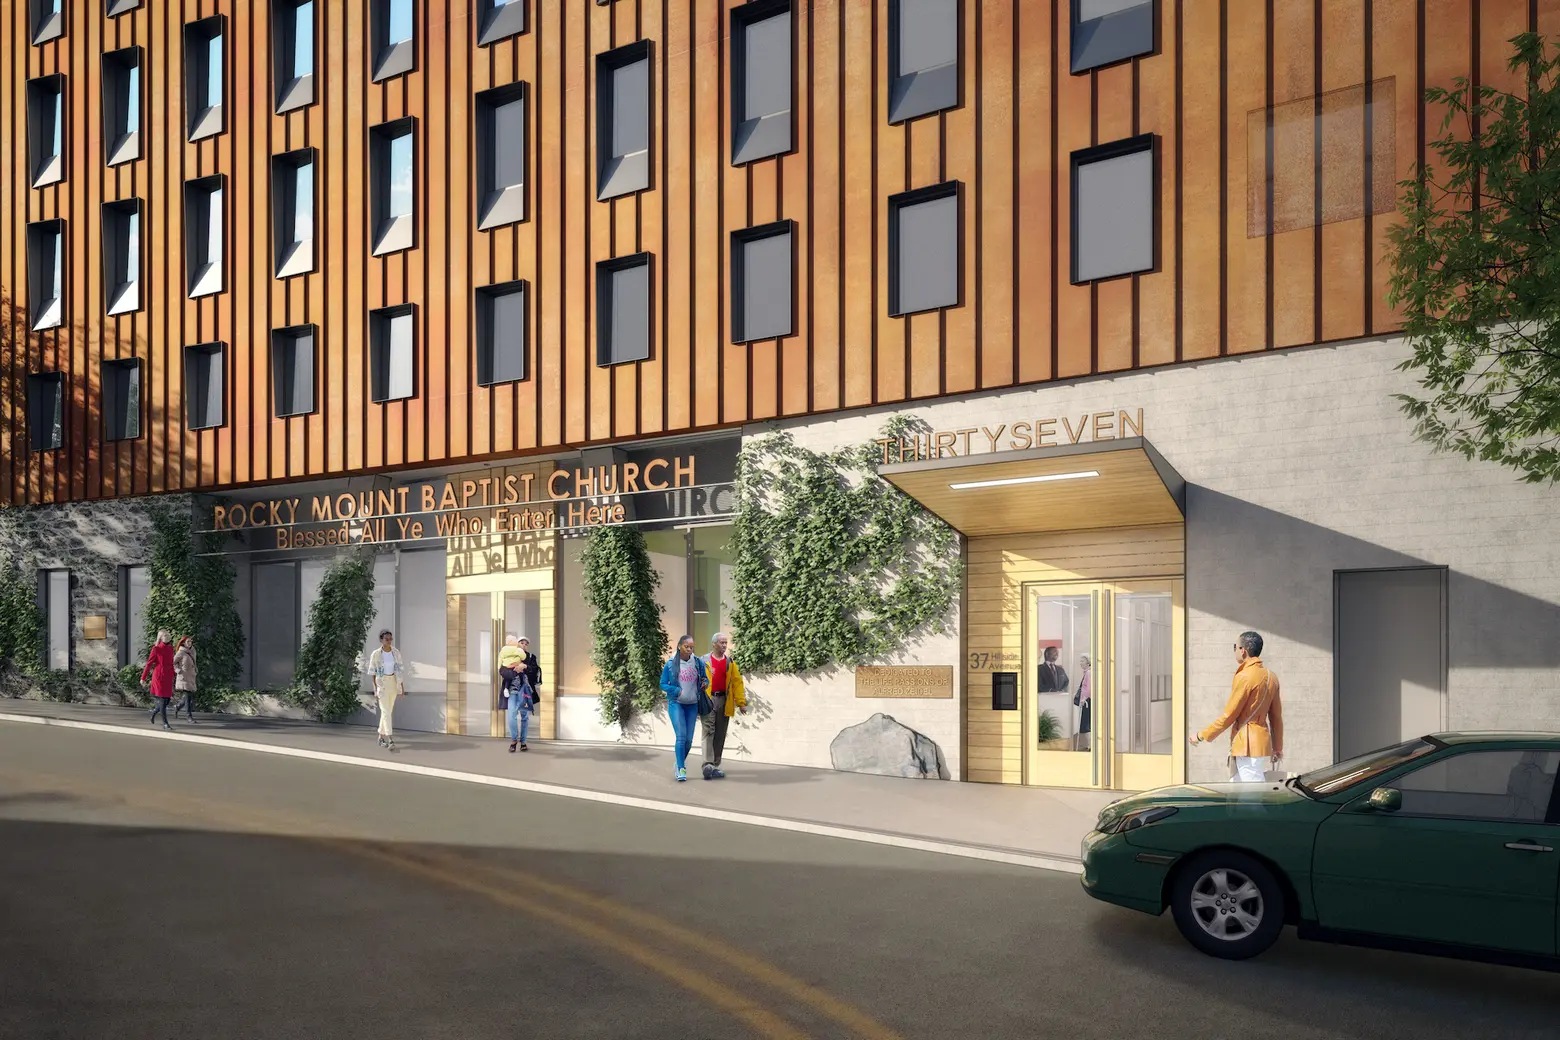 56 apartments for low-income seniors available in Inwood